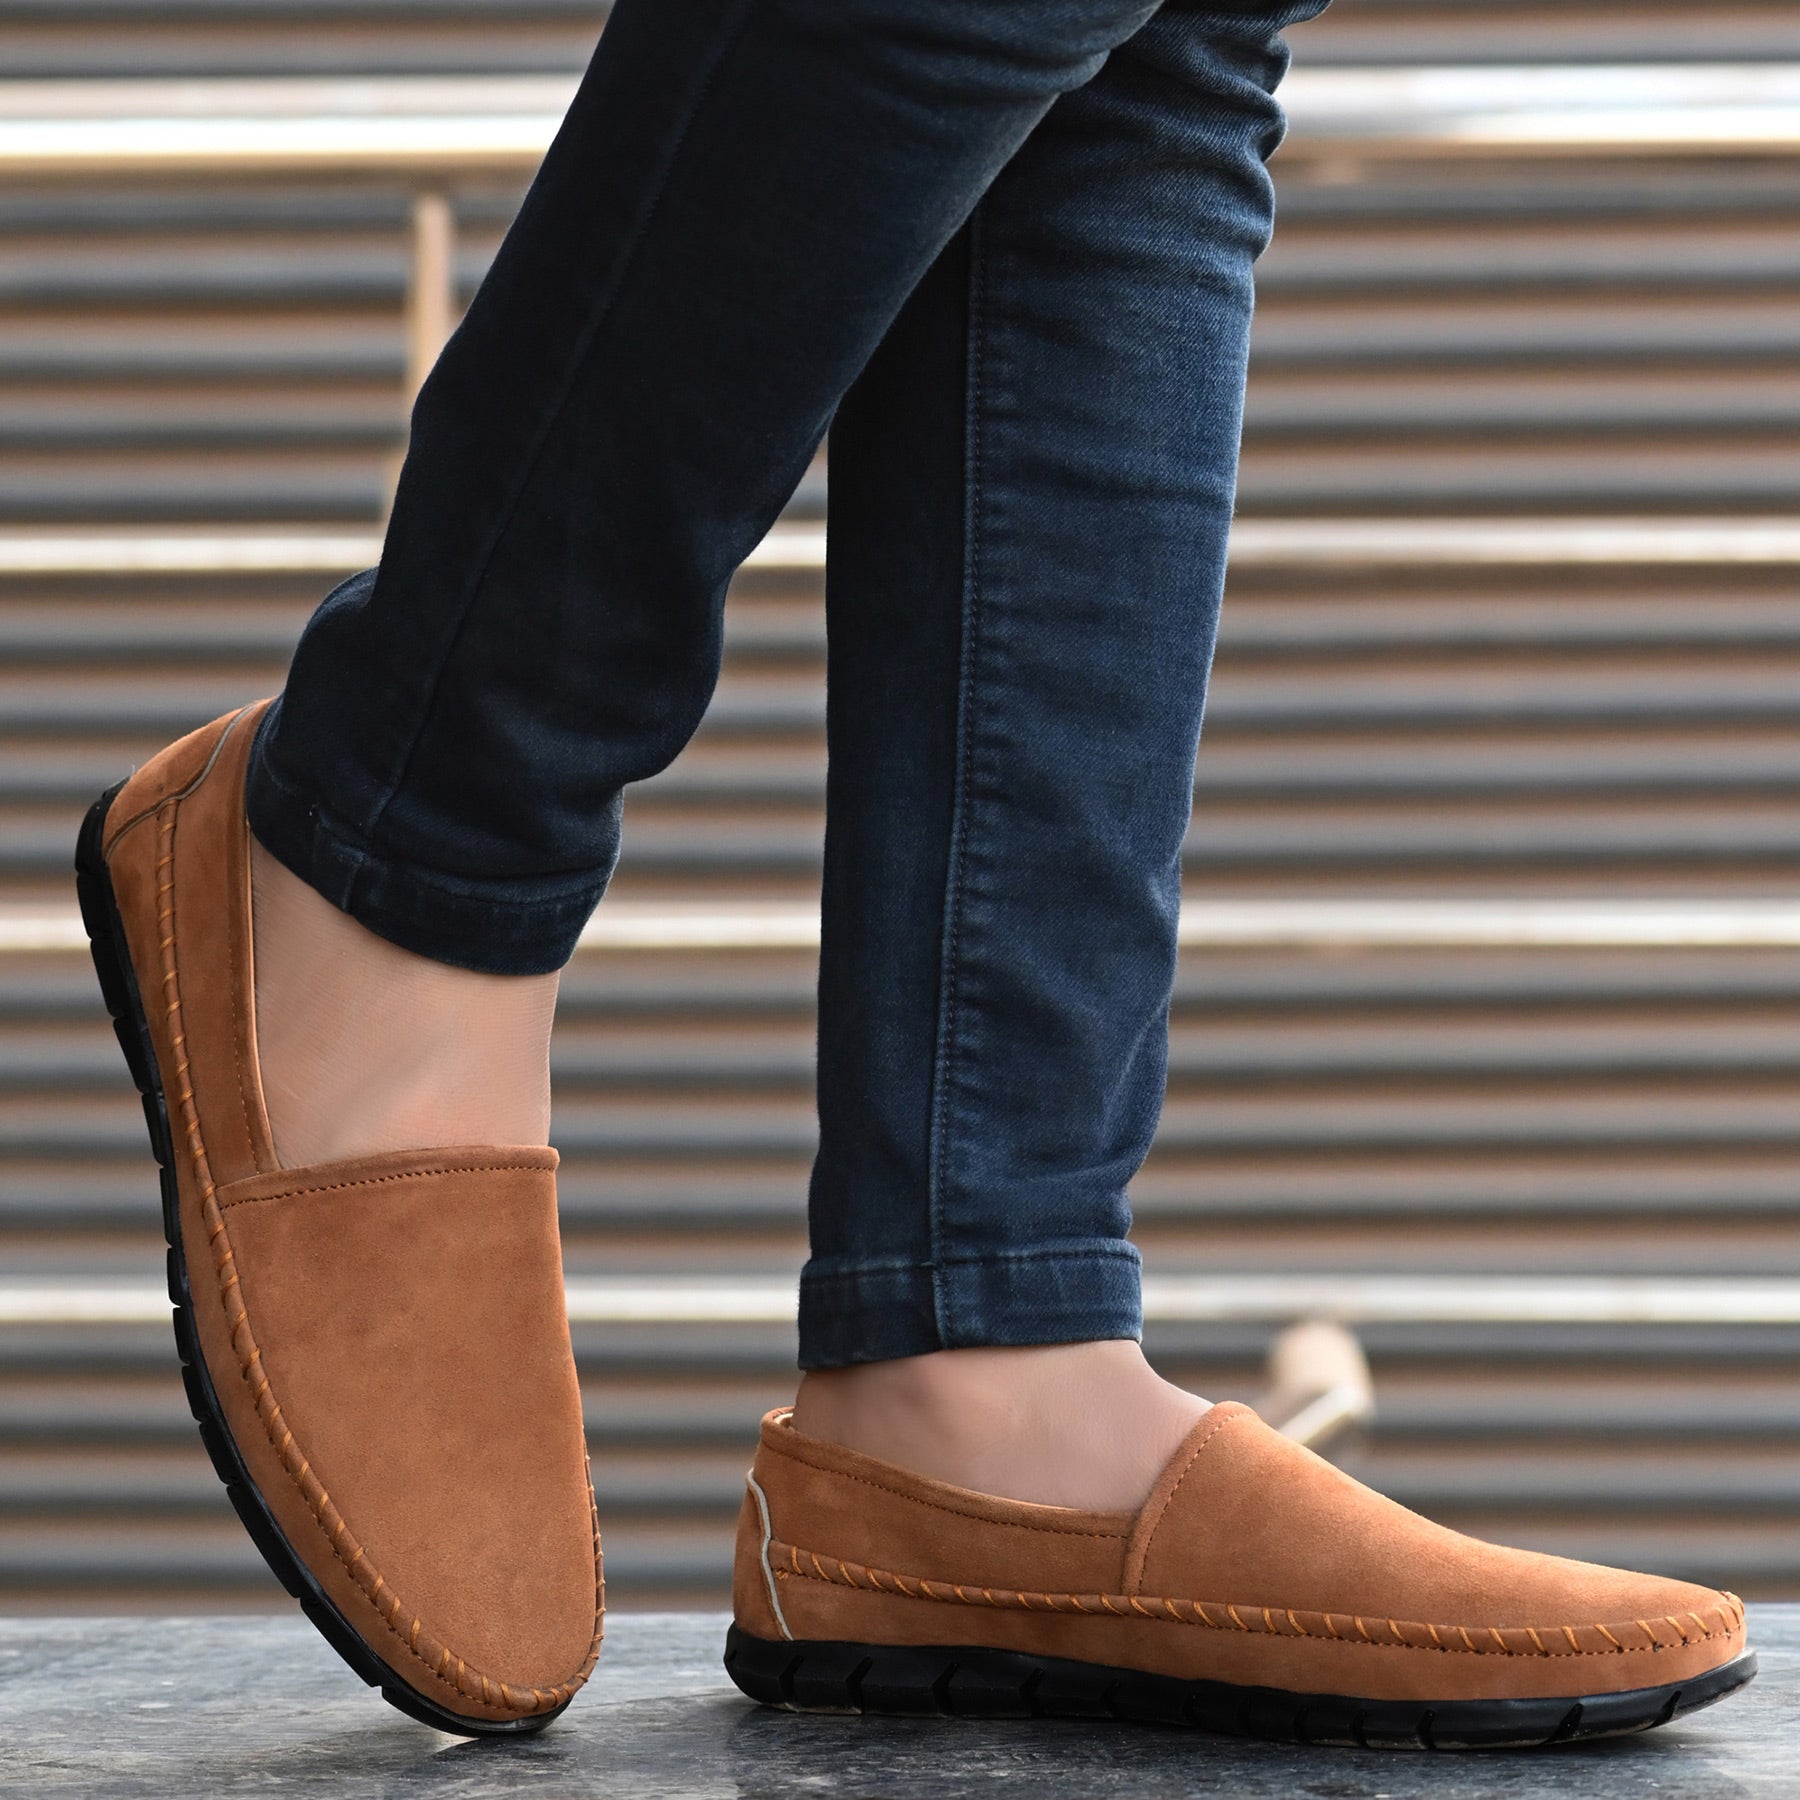 Classic Tan Suede Loafer